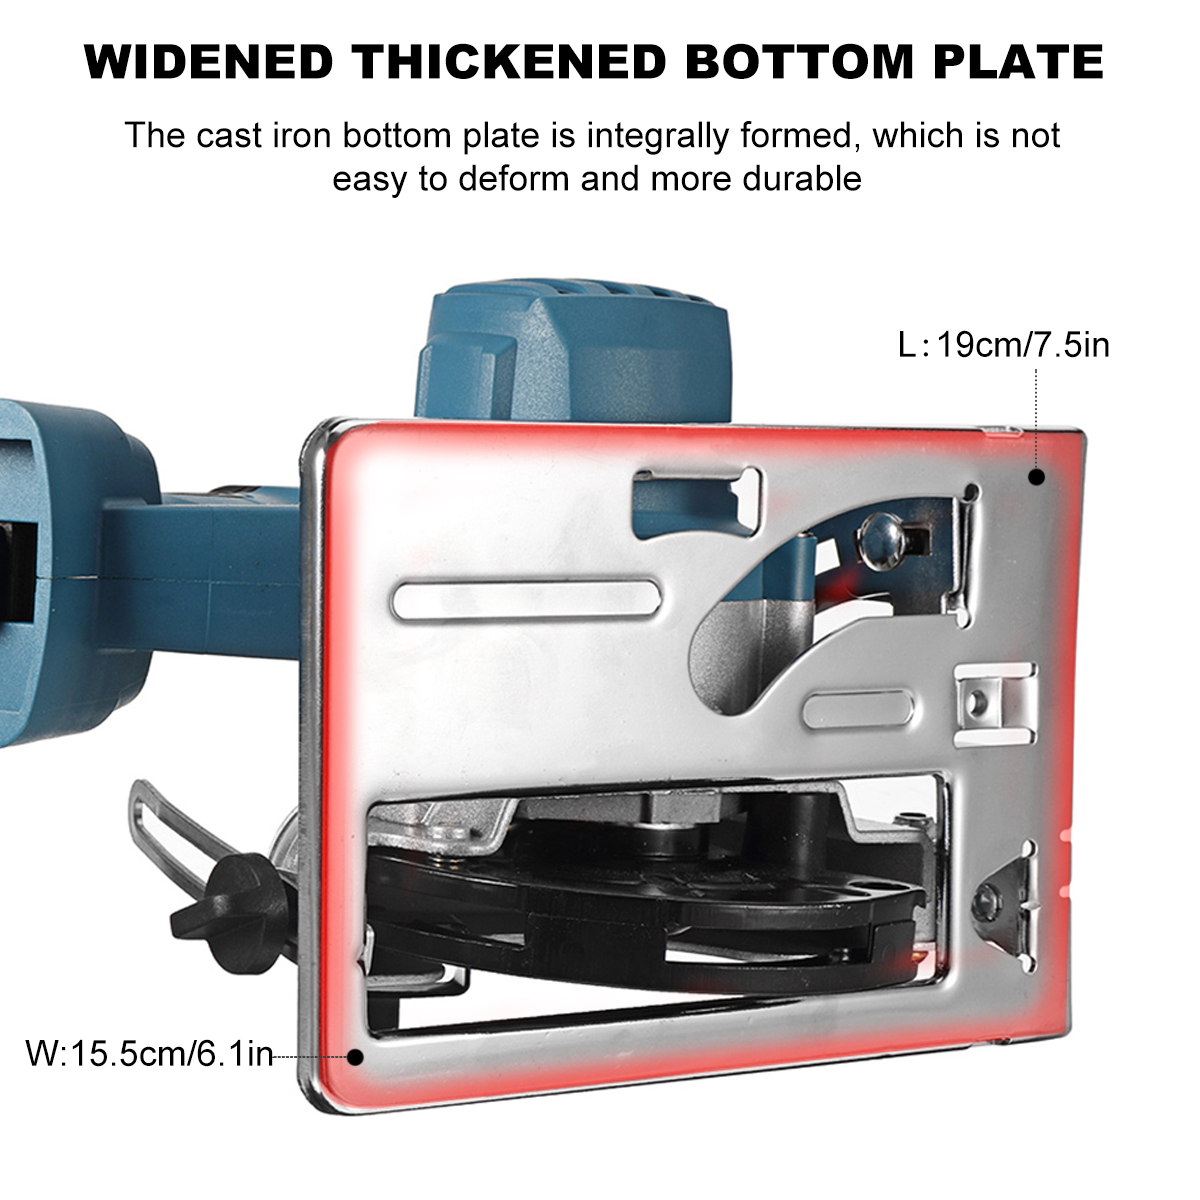 125mm-Wireless-Brushless-Electric-Circular-Saw-Rechargeable-Metal-Wood-Plastic-Stone-Cutting-Tool-fo-1880978-8